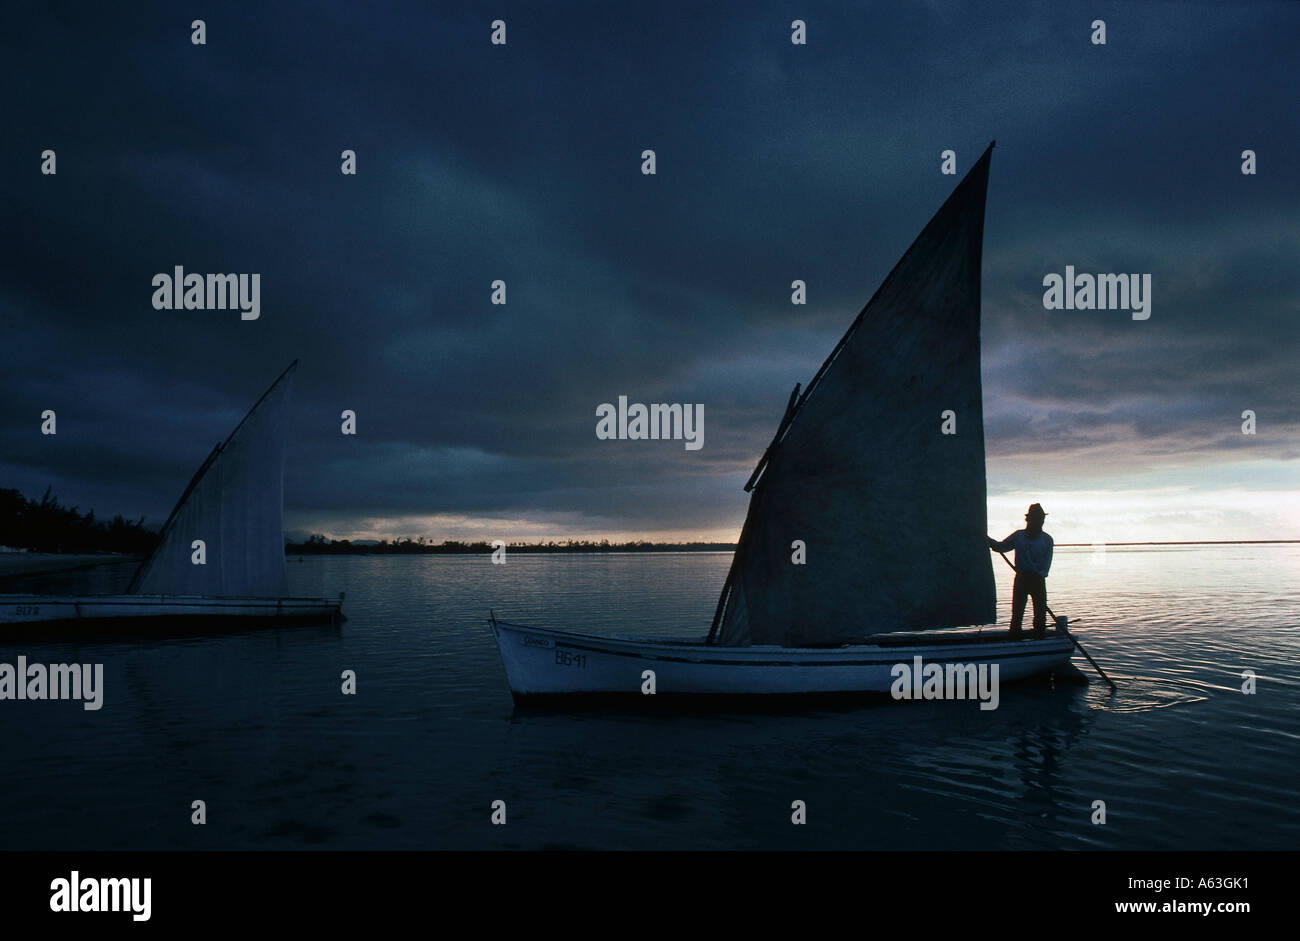 Silhouette of a person sailing on a sailboat Mauritius Stock Photo